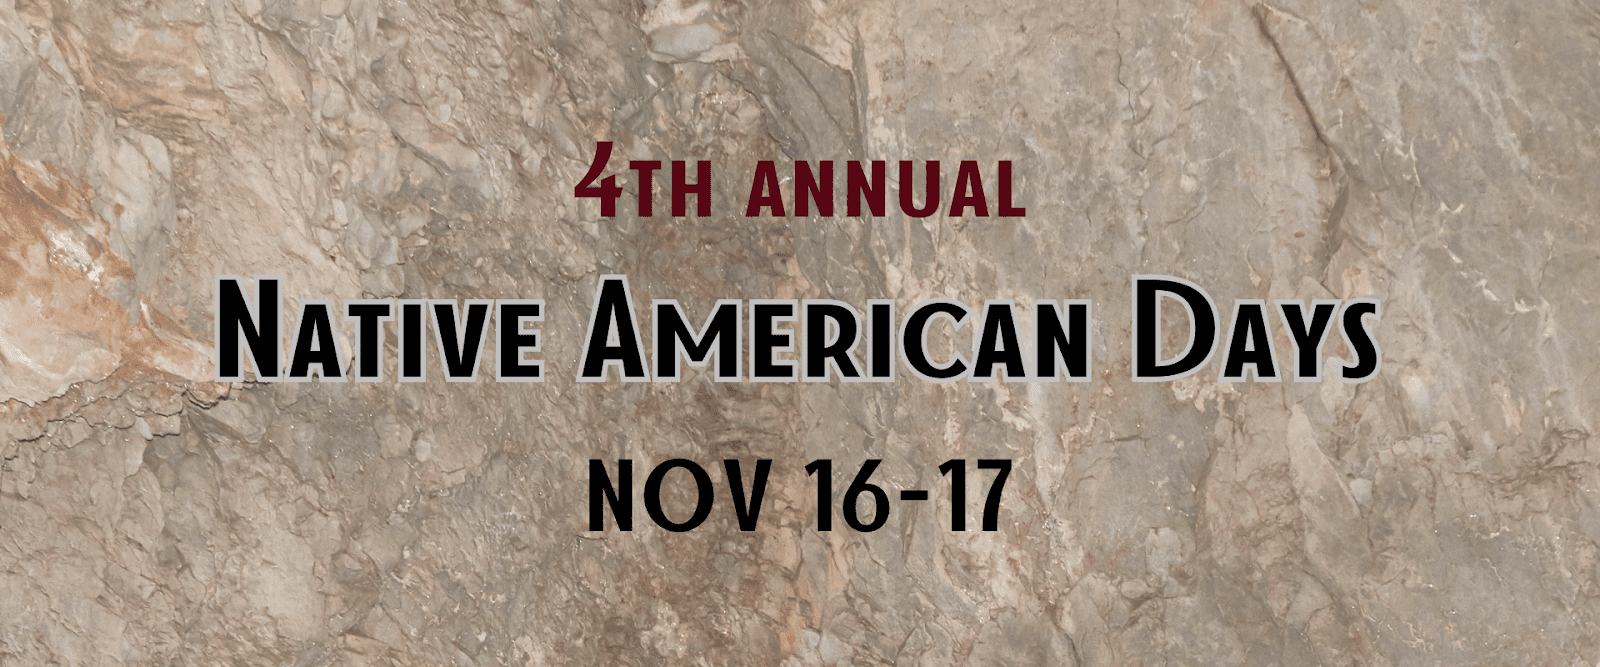 Background of rock surface with words saying "4th annual Native American Days, Nov 16-17"